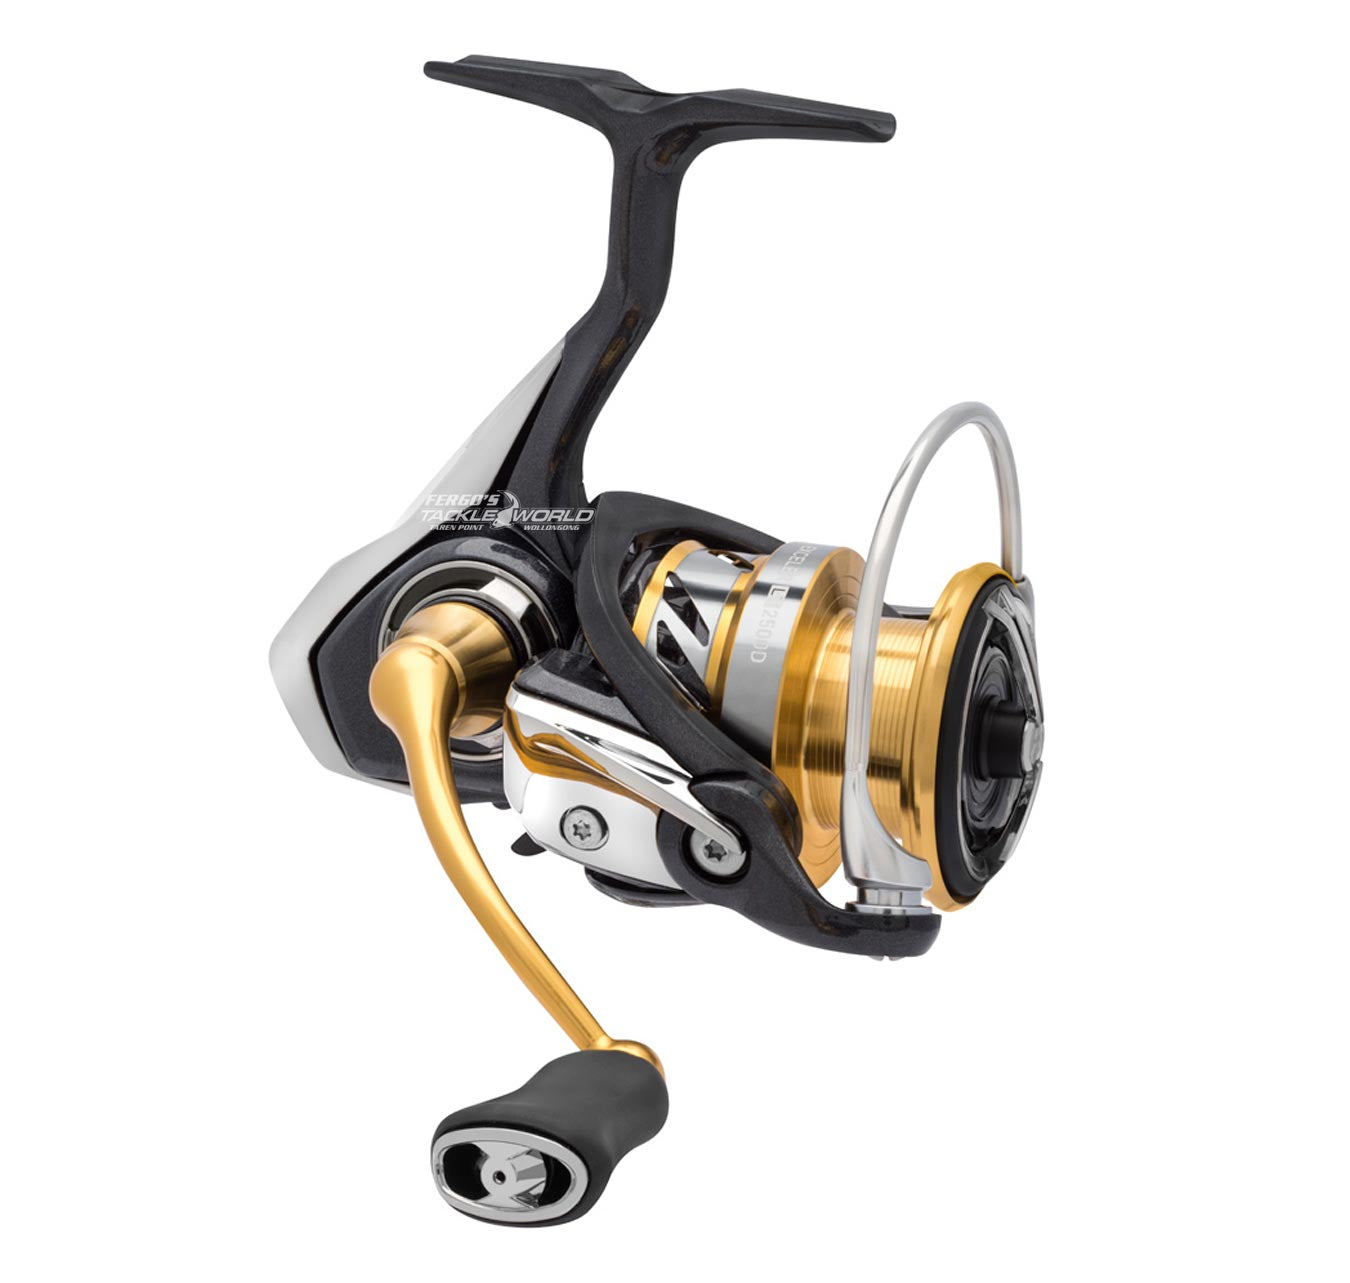 Daiwa 21 Freams LT Fishing Reels - Spinning / Lure - 1/2 PRICE CLEARANCE